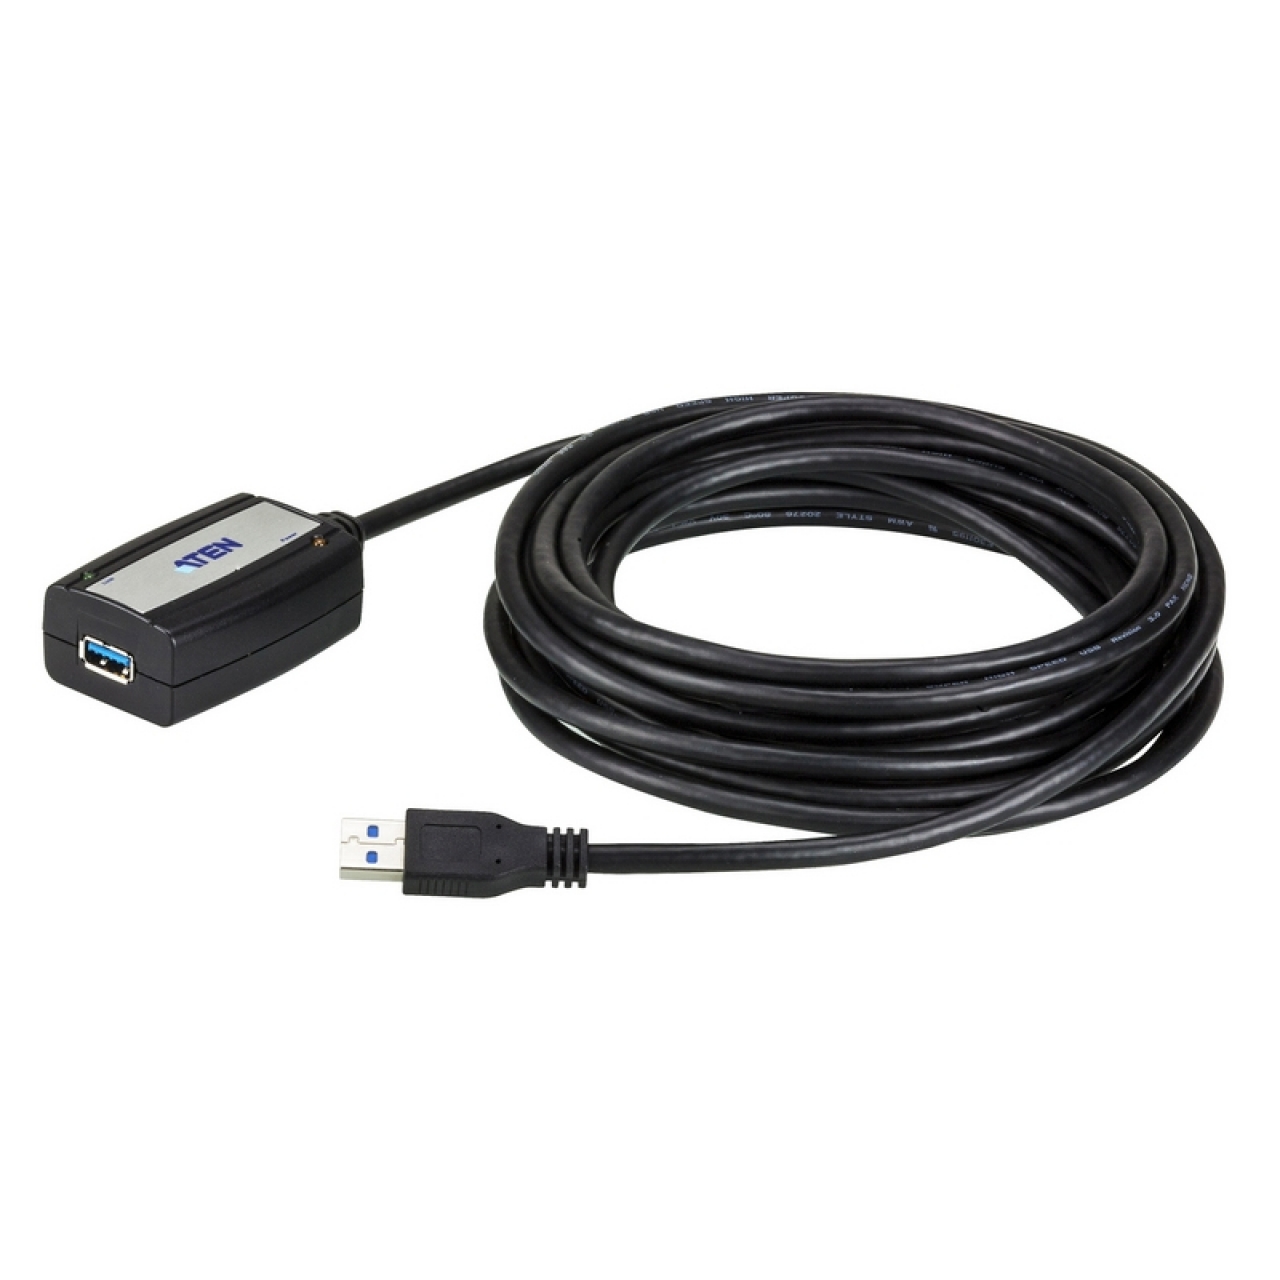 ATEN UE350A-AT 5M USB 3.1 GEN1 EXTENDER CABLE